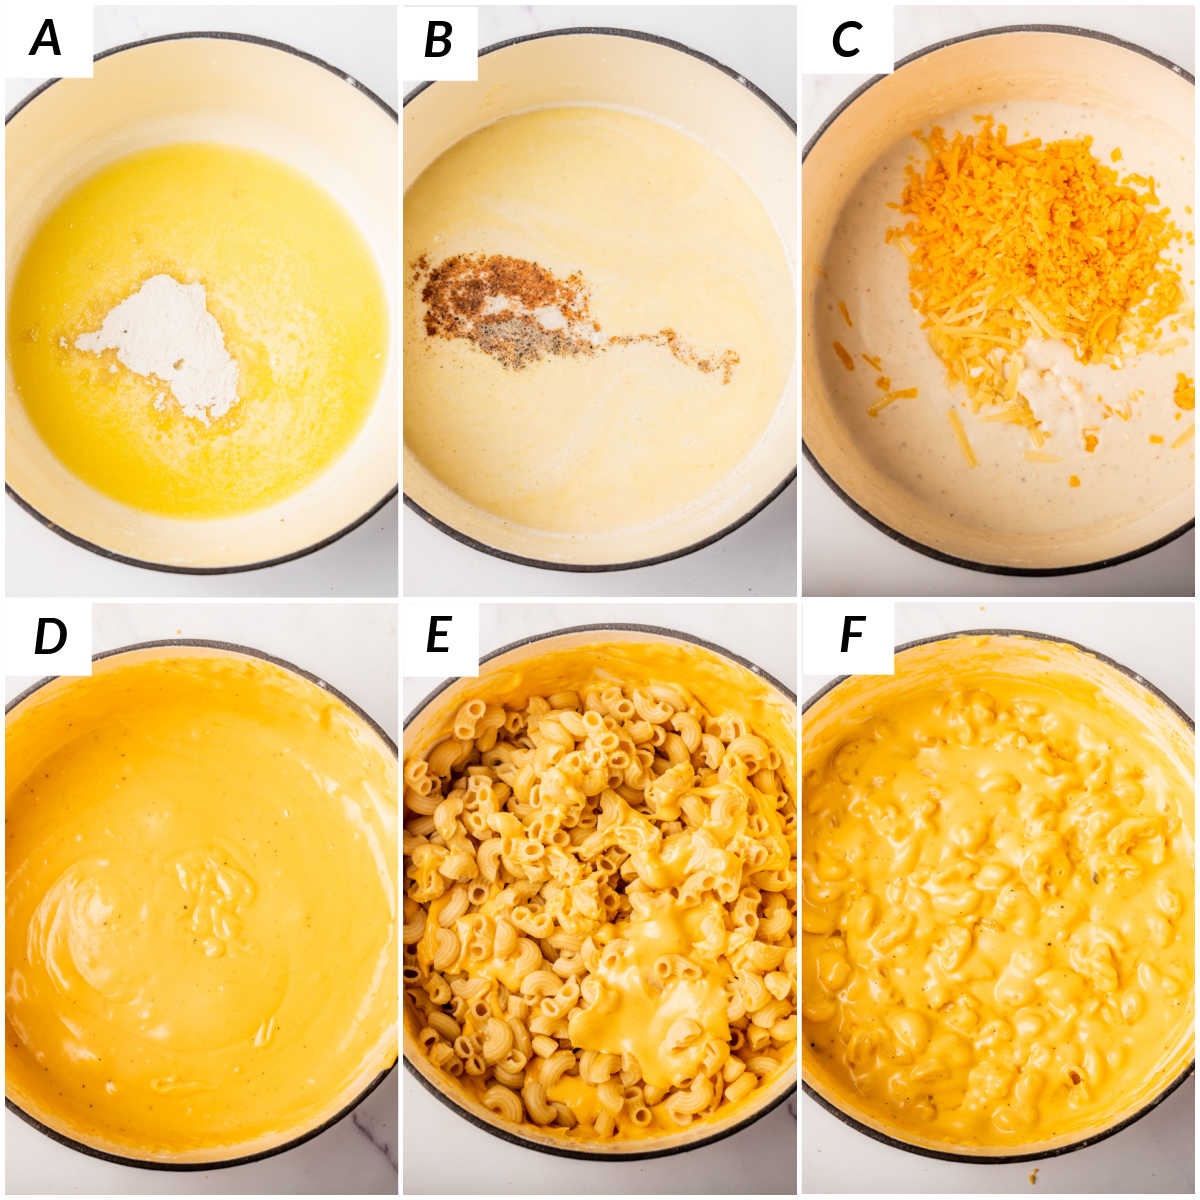 image collage showing the steps for making gluten free macaroni and cheese